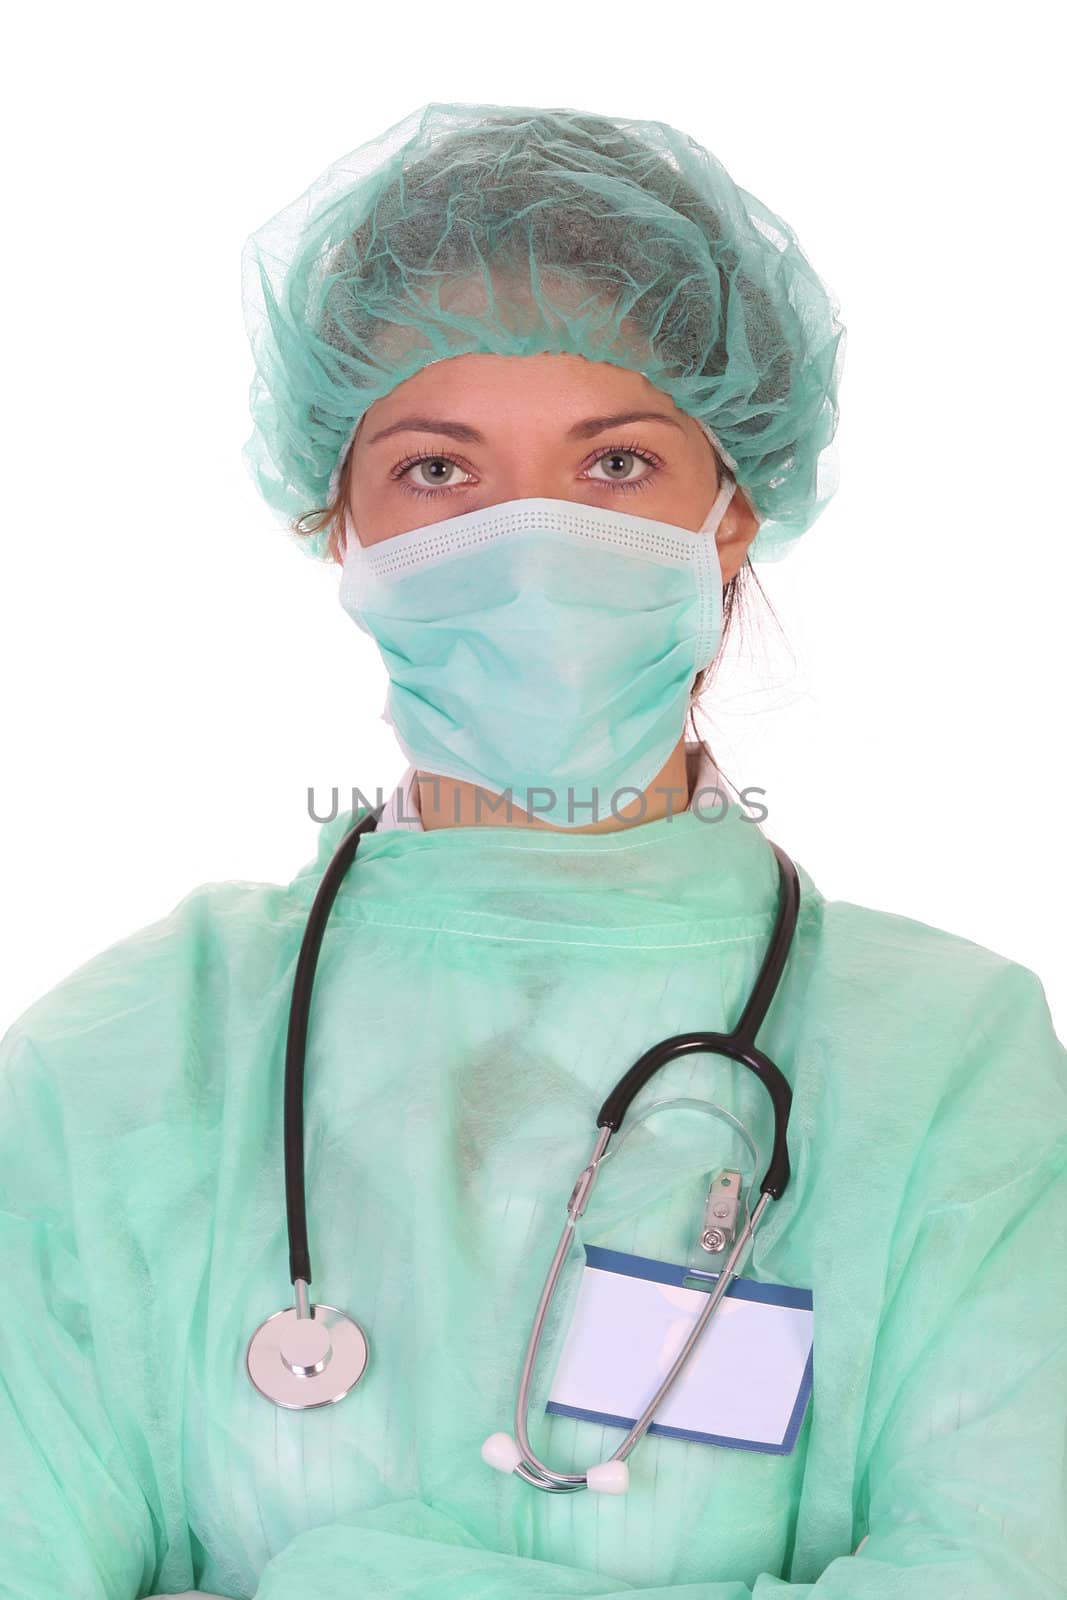 Details an healthcare worker on white background